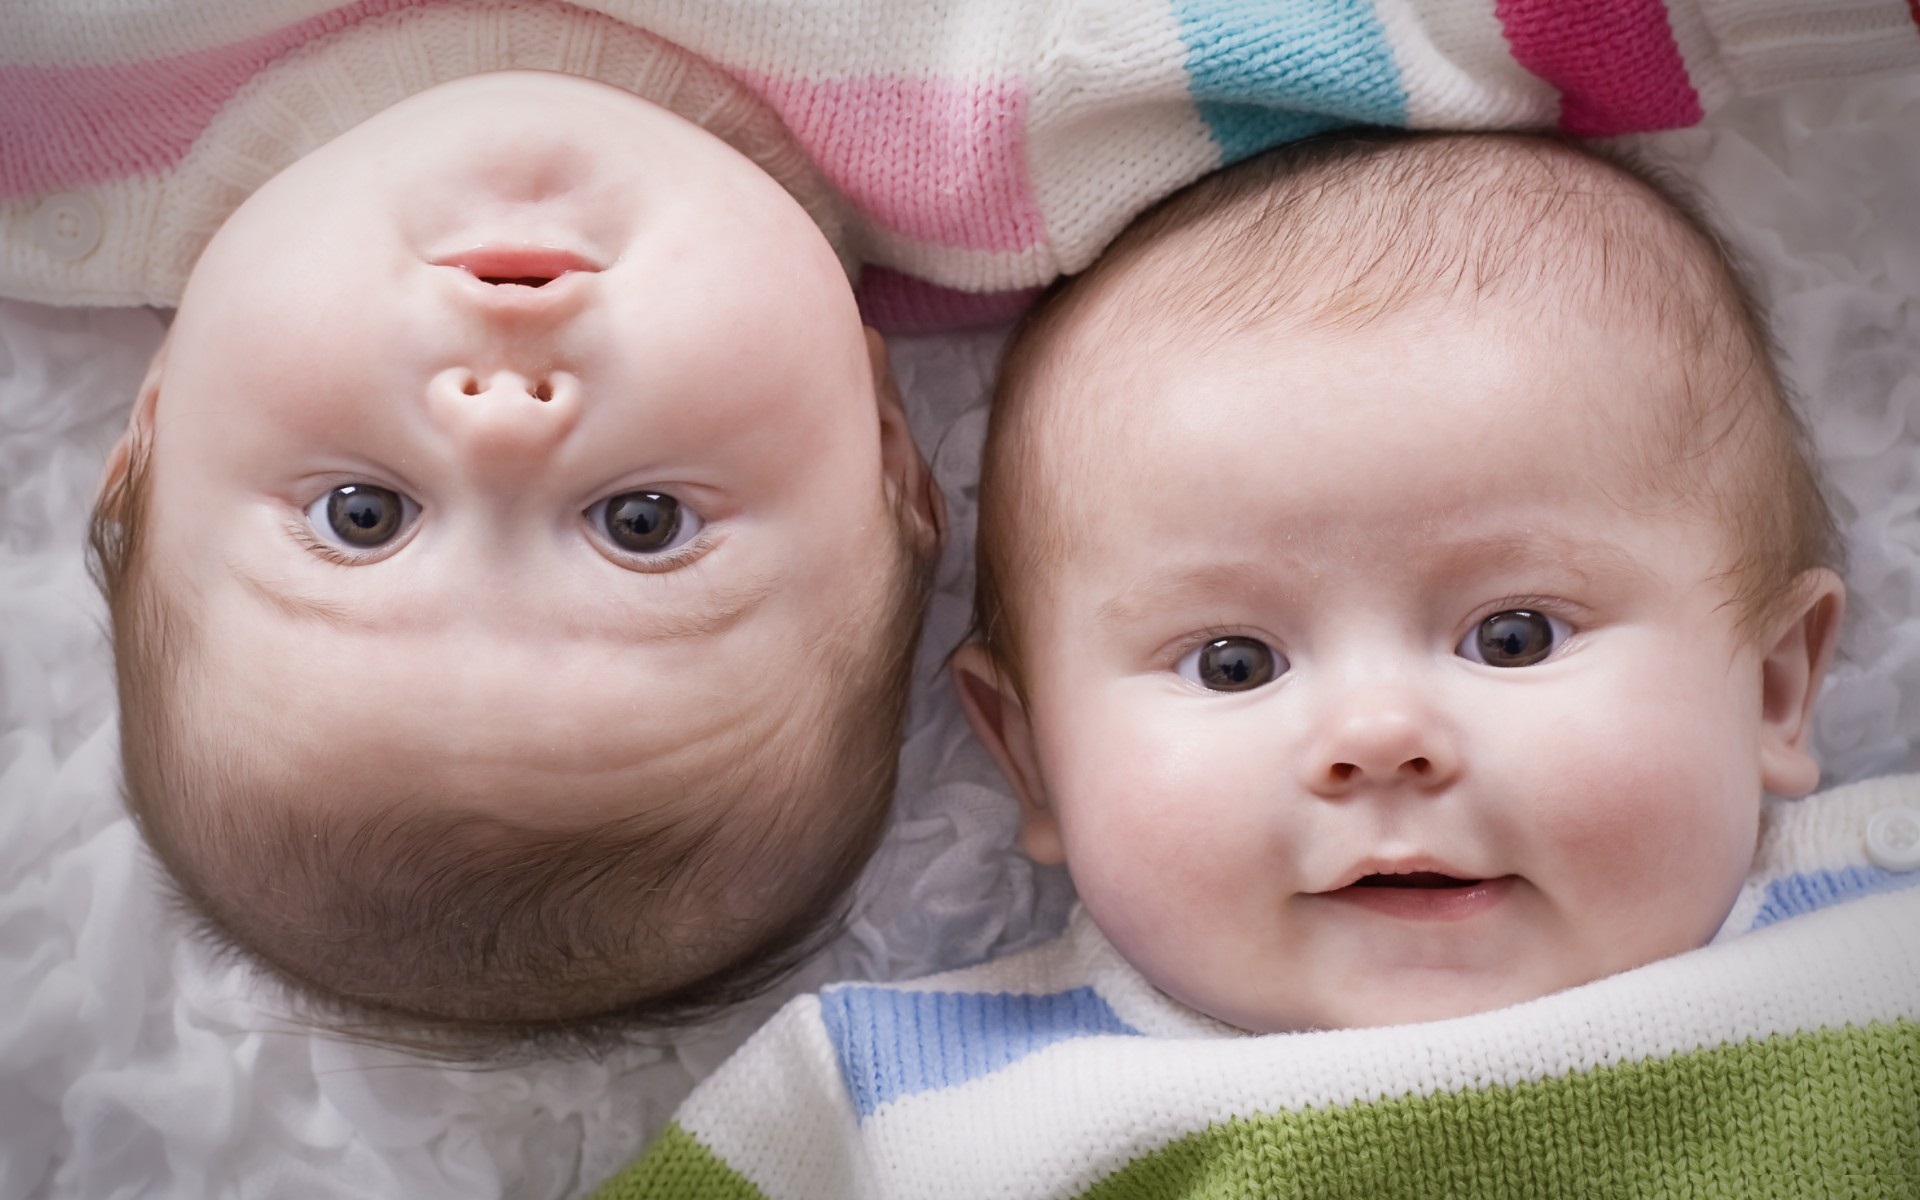 6. Women who eat lots of dairy products have bigger chances for having twins